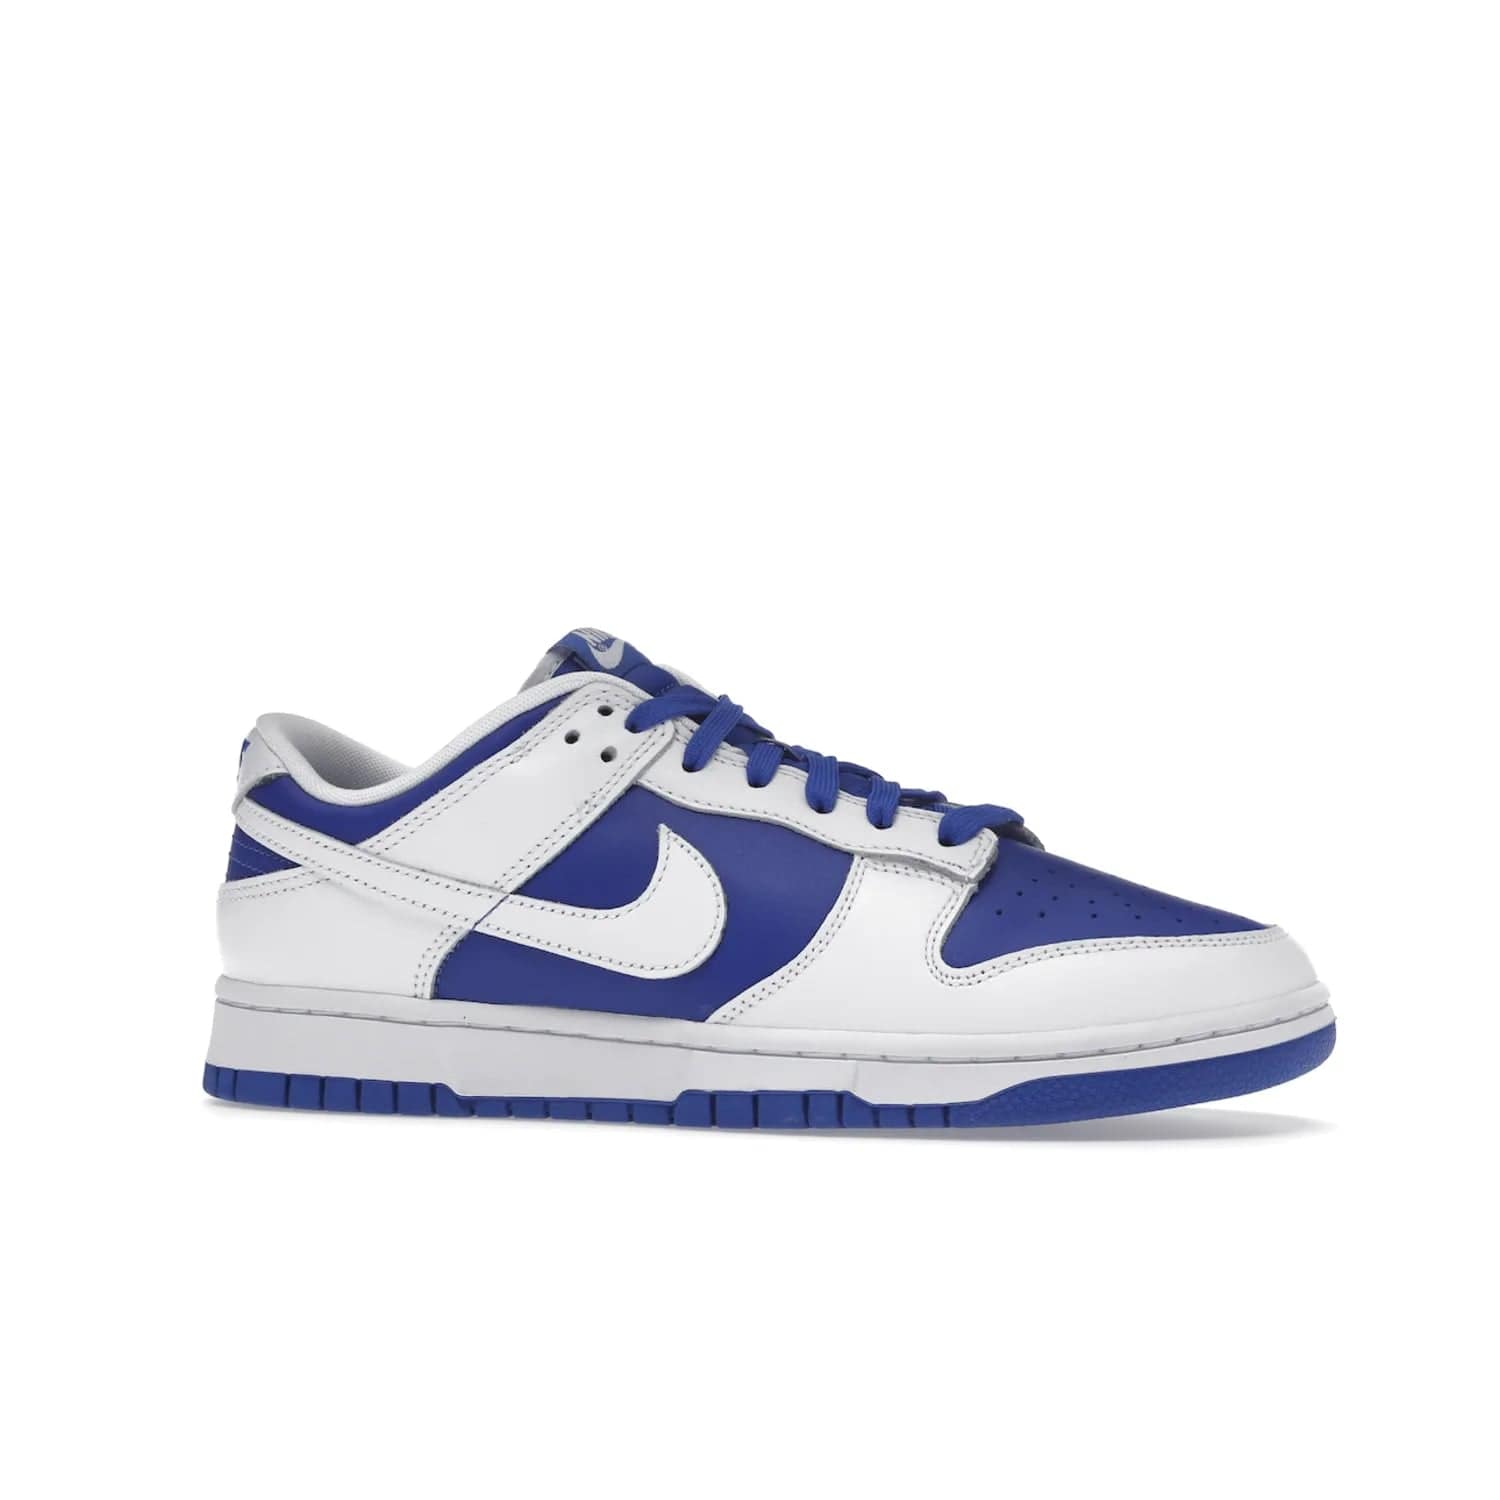 Nike Dunk Low Racer Blue White - Image 3 - Only at www.BallersClubKickz.com - Sleek Racer Blue leather upper and white leather overlays make up the Nike Dunk Low Racer Blue White. Woven tag and heel embroidery for a 1985 Dunk look with a matching EVA foam sole completes the classic colorway.